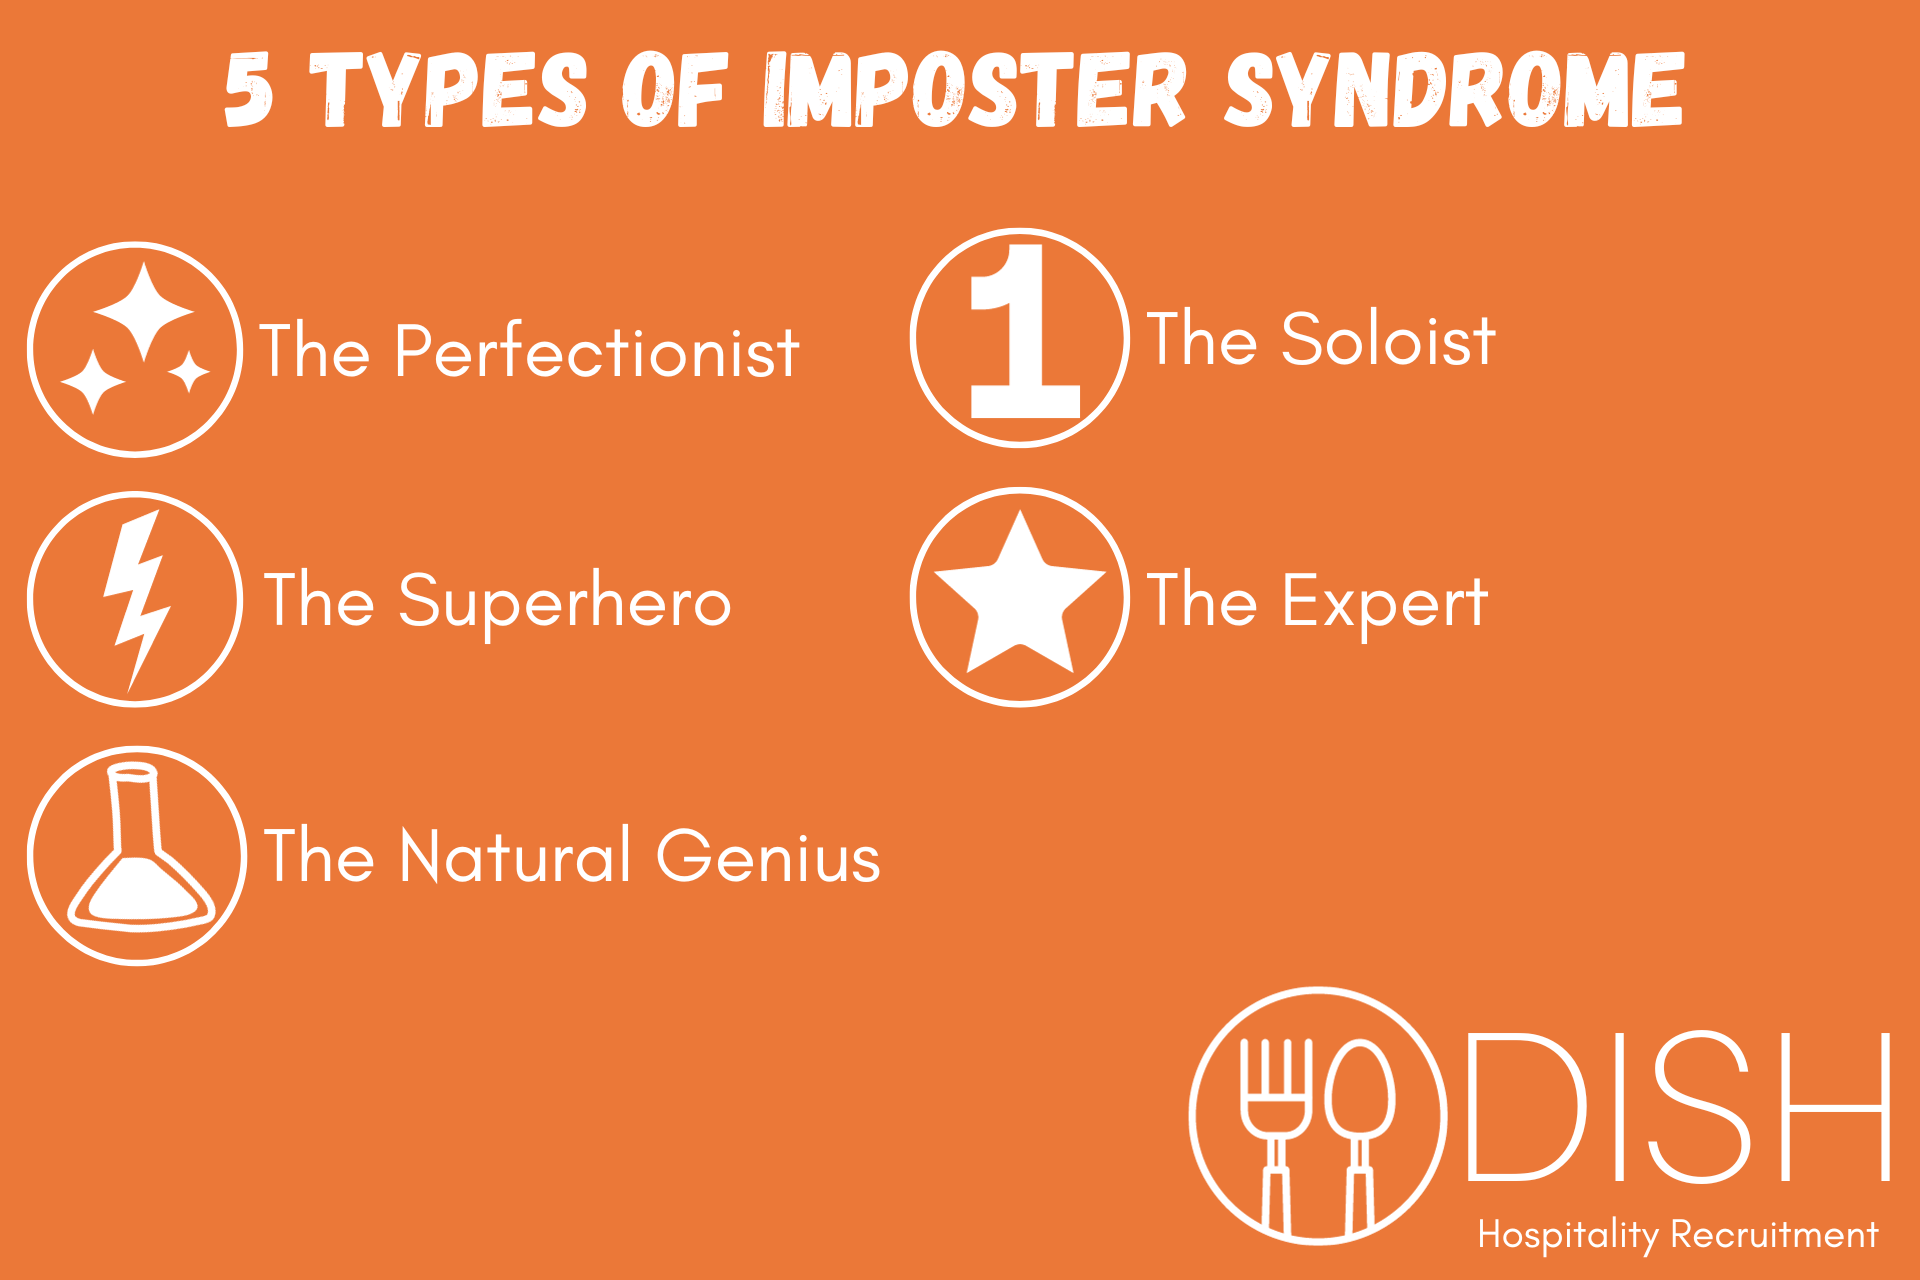 How to Manage Imposter Syndrome